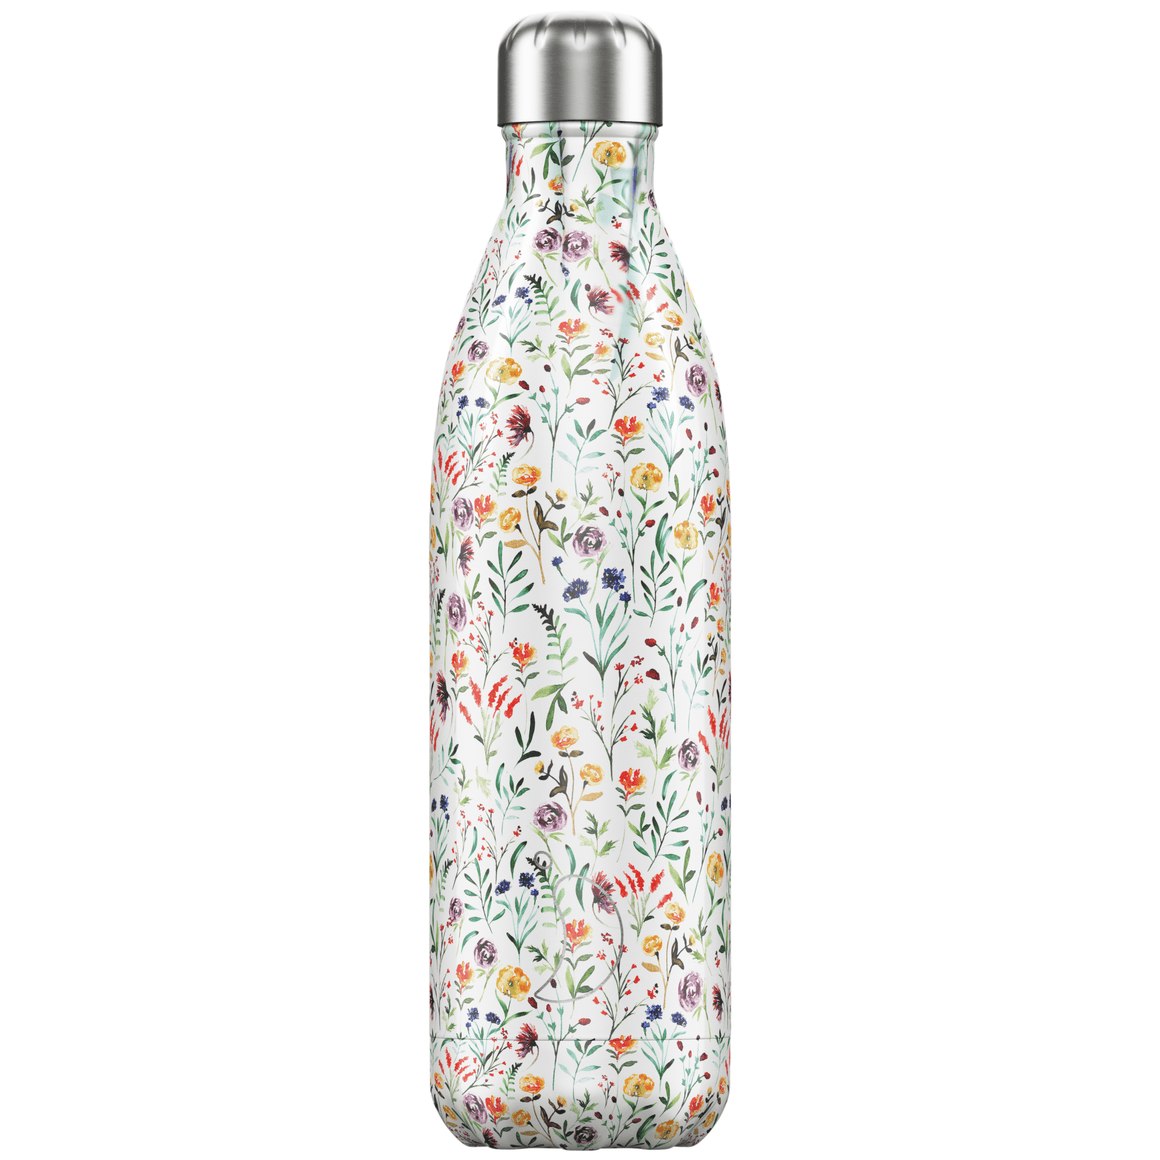 Chilly's Floral Meadow 750ml Bottle